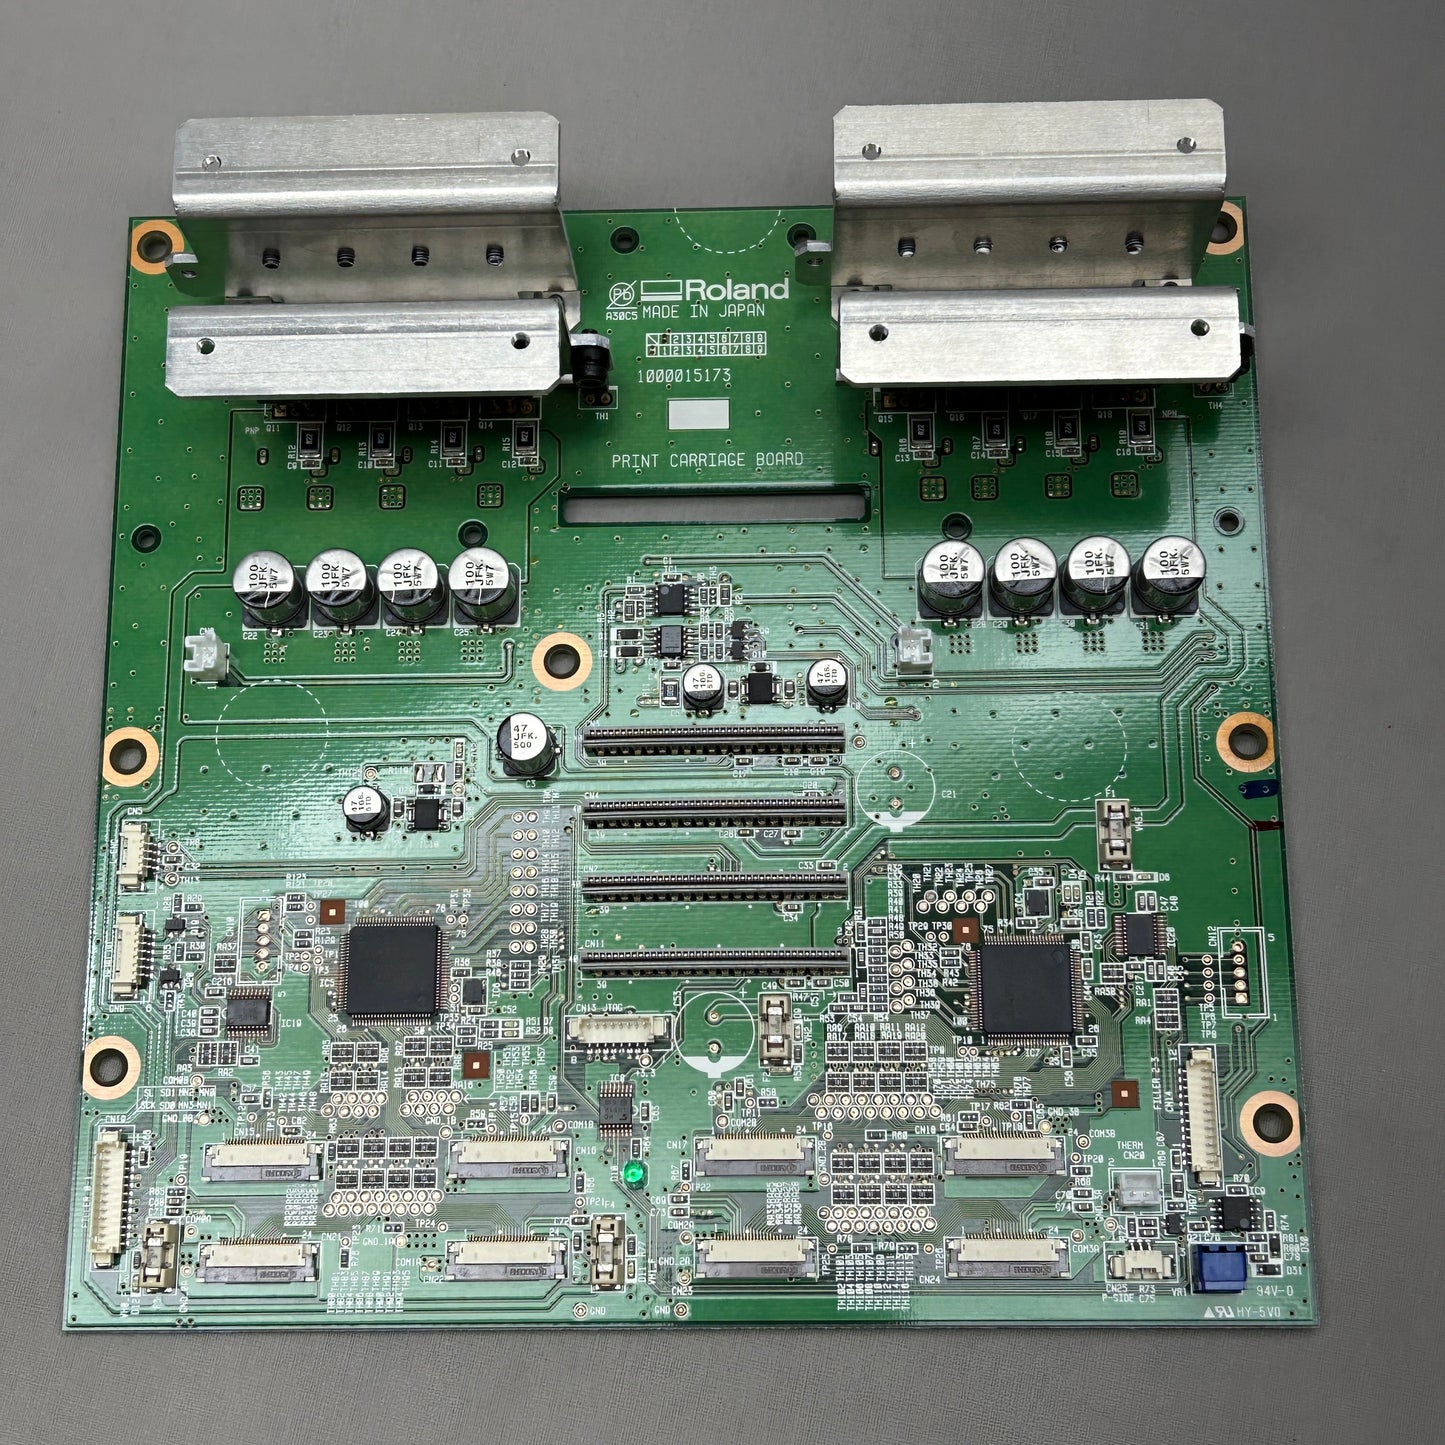 ROLAND ASSY Print Carriage Board VG-640_01 6000002185 (New)